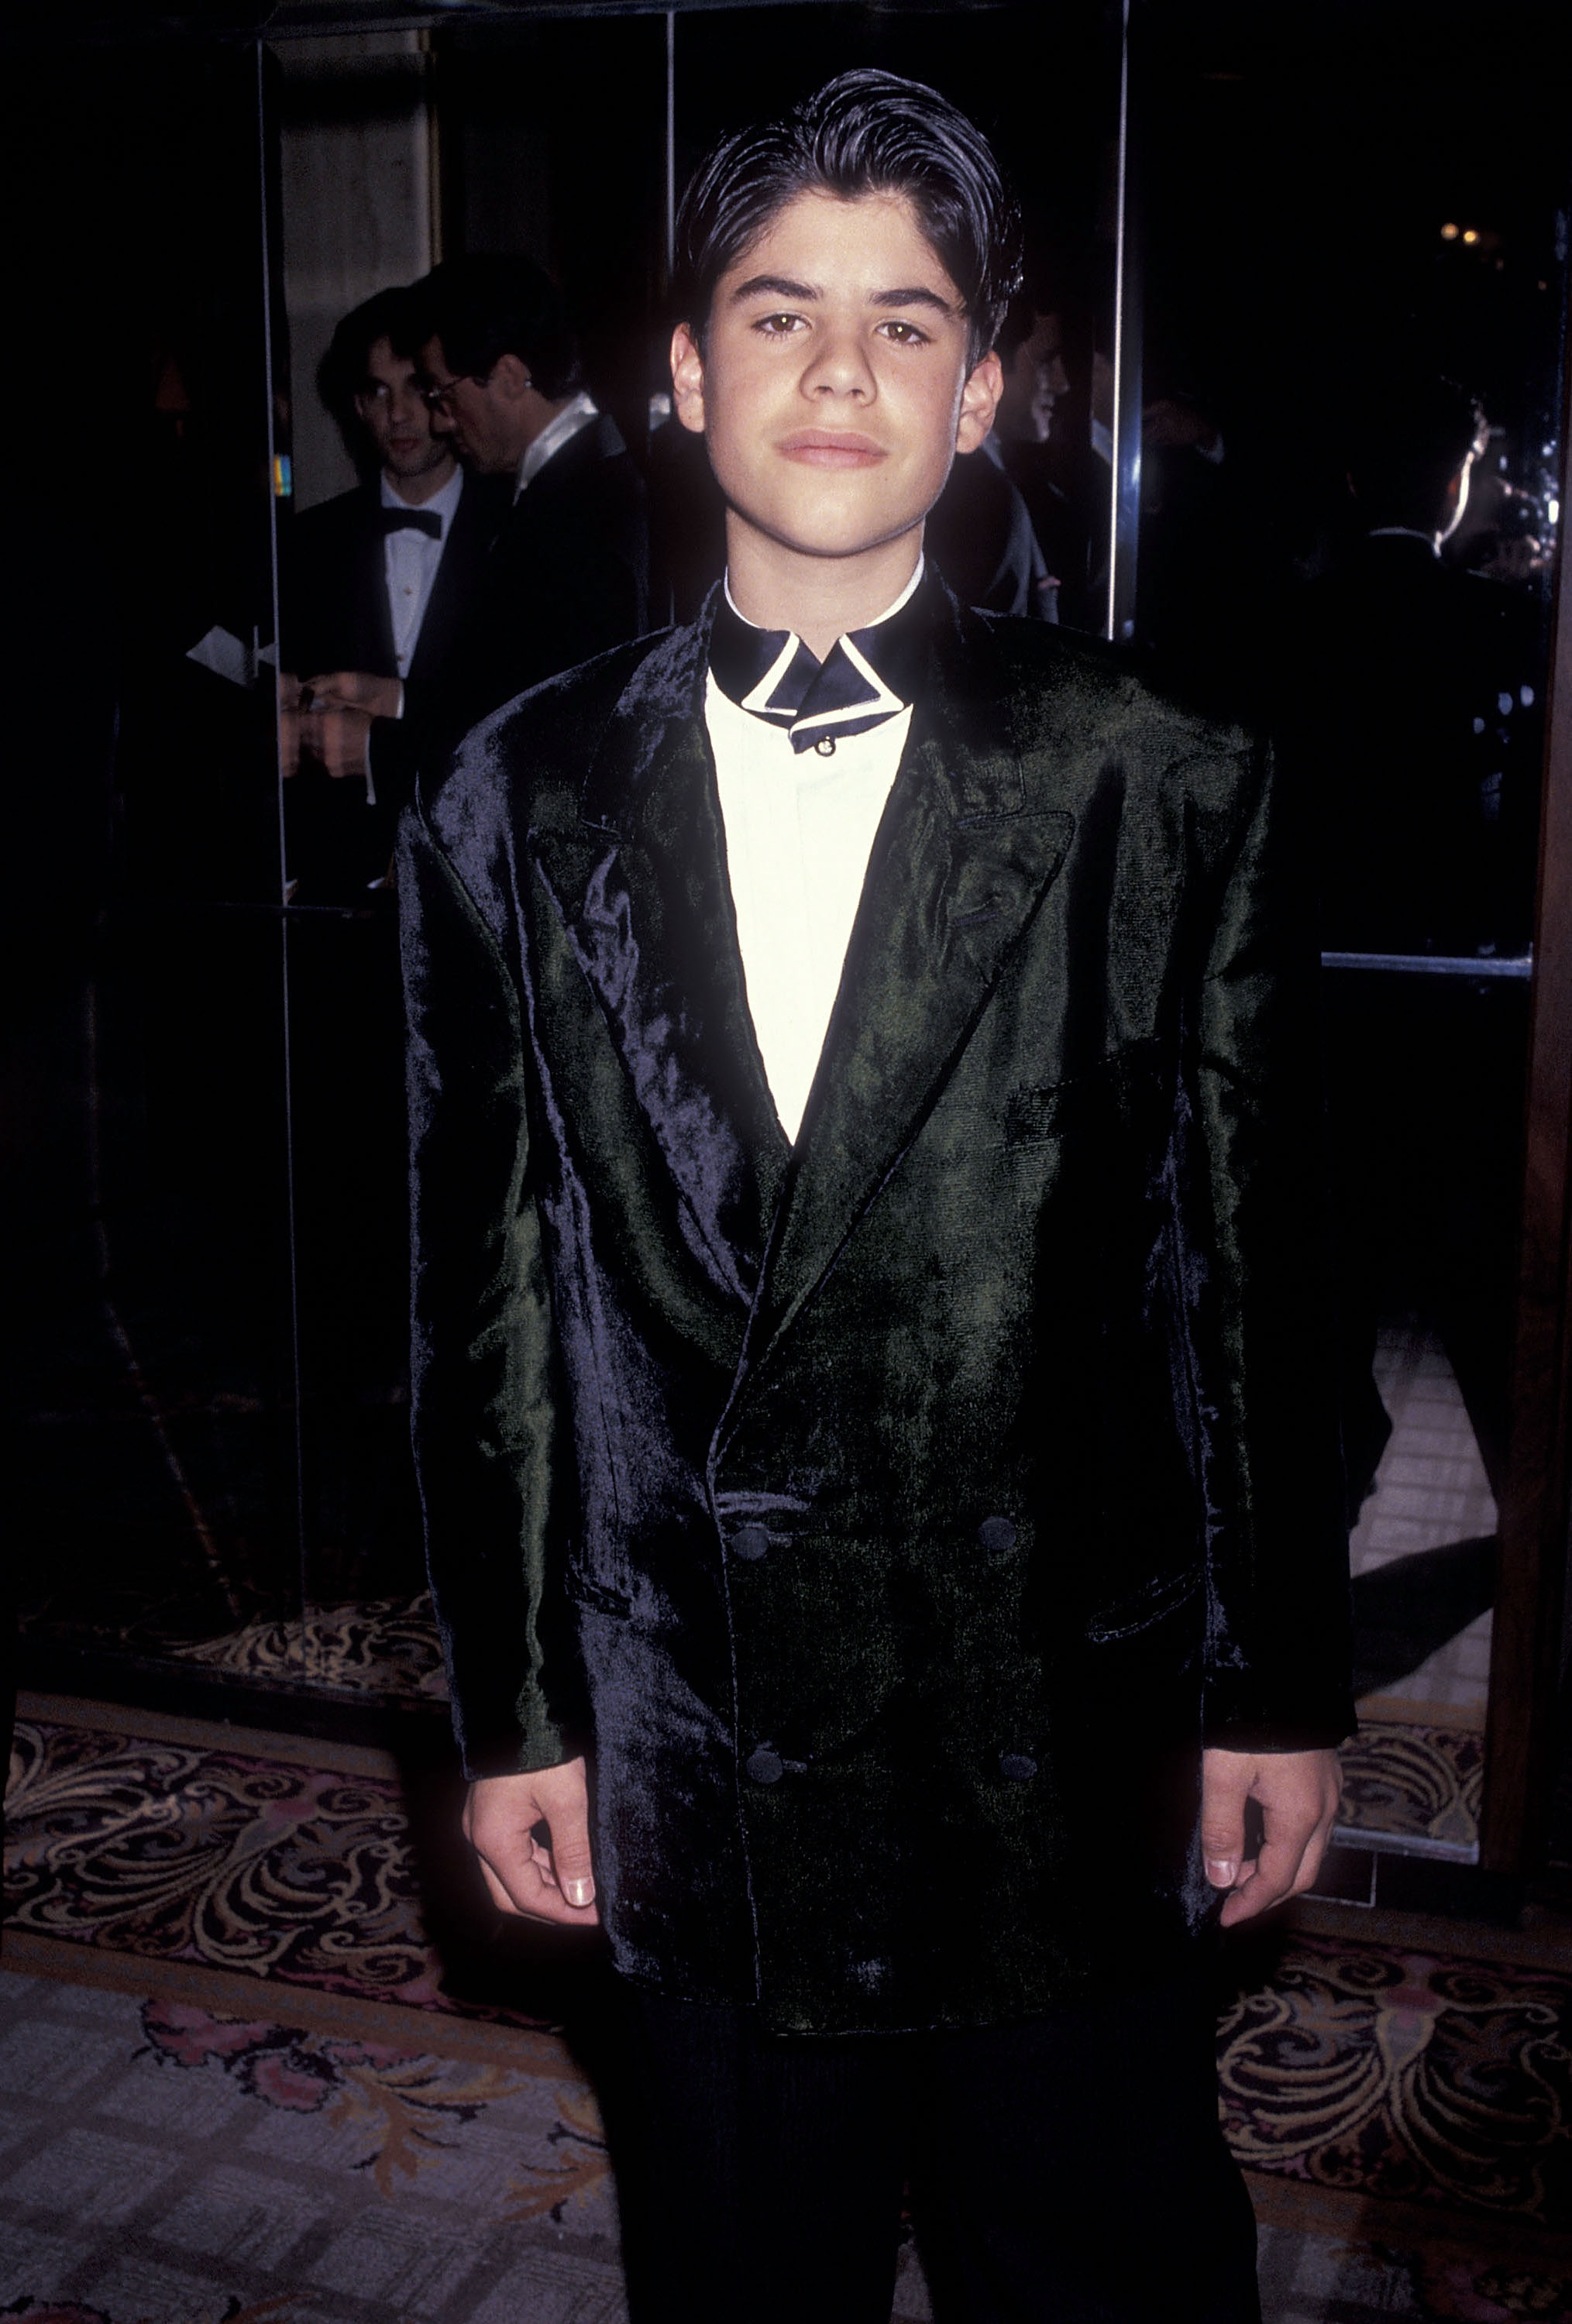 Sage Stallone at the Fifth Annual Fashion Show & Dinner Benefit Salute to Gianni Versace sponsored by the California Fashion Industry Friends of AIDS Project Los Angeles in Century City, California, on February 13, 1991 | Source: Getty Images